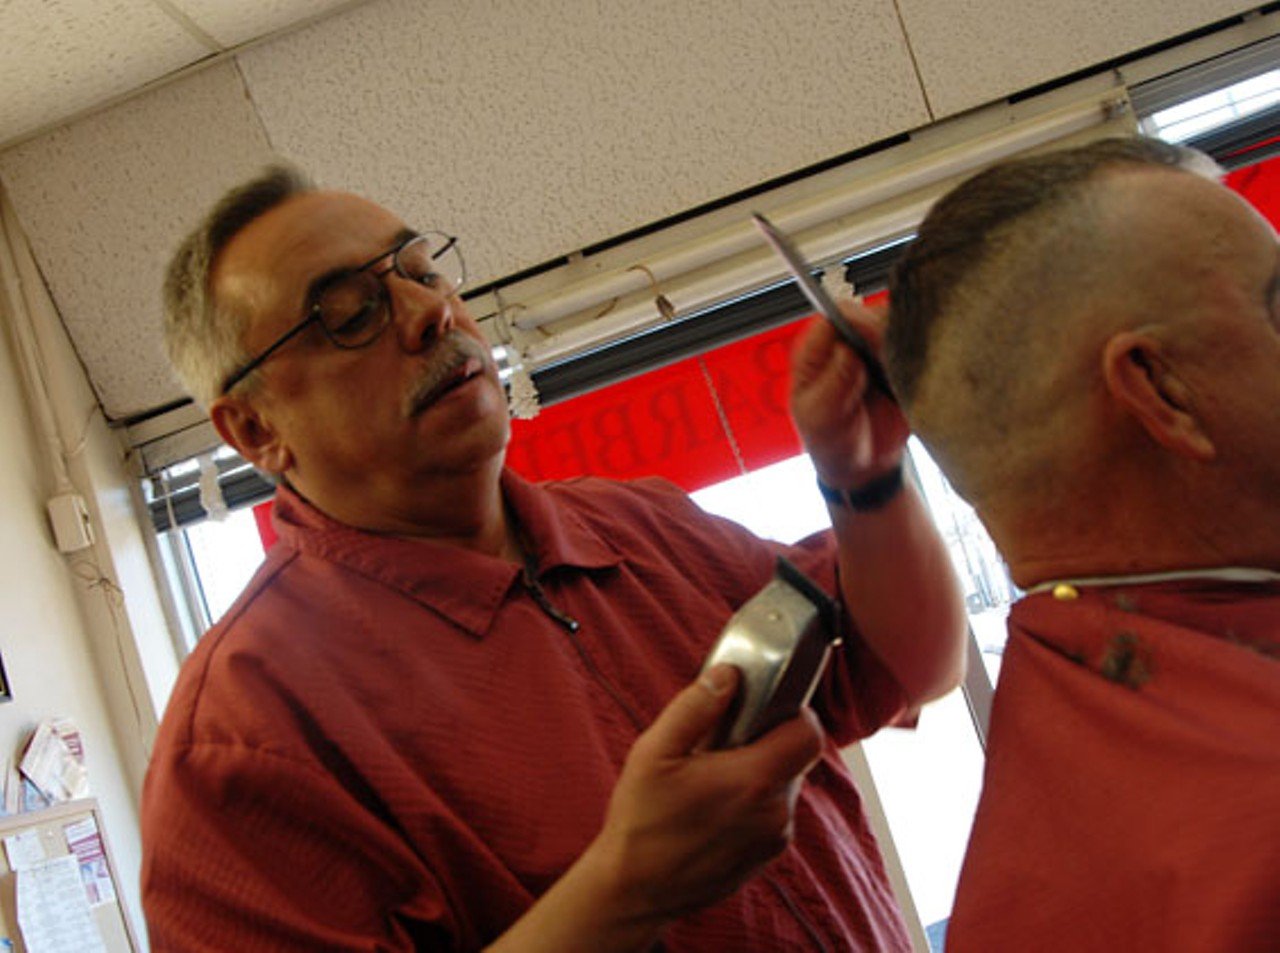 South Hampton Barber Shop (5423 Hampton Avenue) opened in 1955. Pictured is owner, Mark Hoffmann.